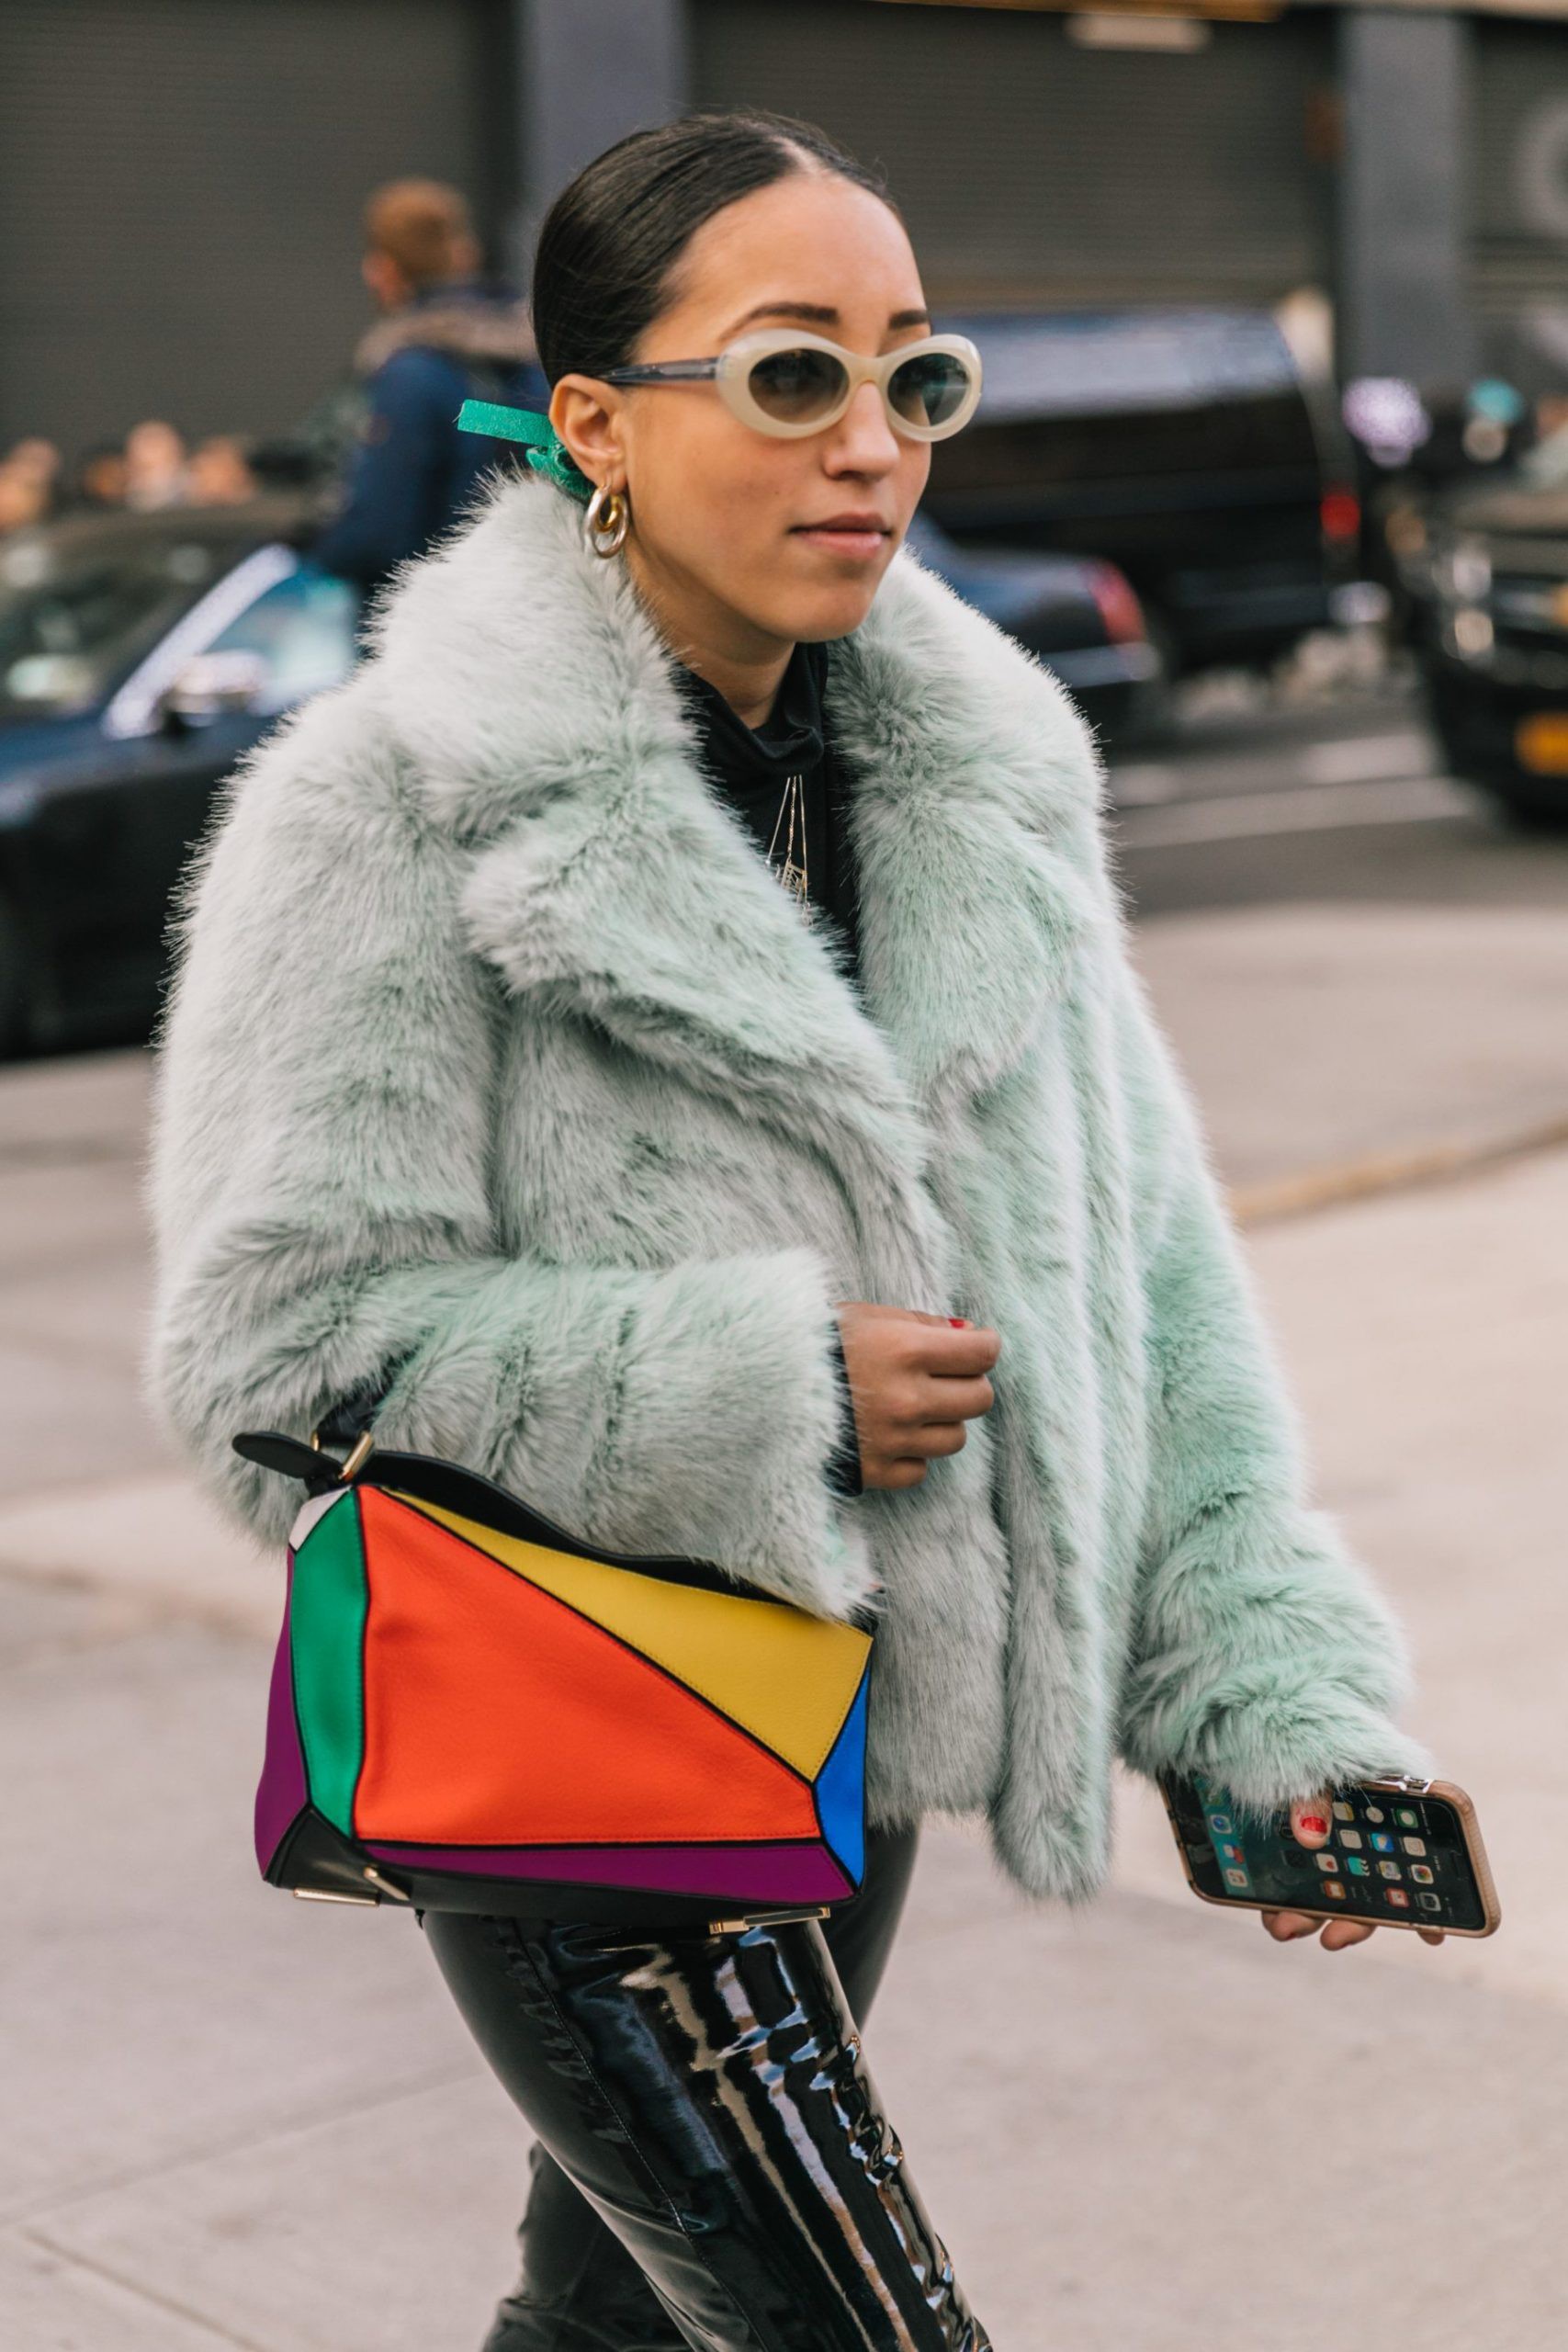 Bright colored bag, patent leather pants, fluffy coat = love everything about th... | Summer Outfit Ideas 2020: leather,  Outfit Ideas,  summer outfits,  Love,  bag,  Pants,  coat,  Furry Coat  